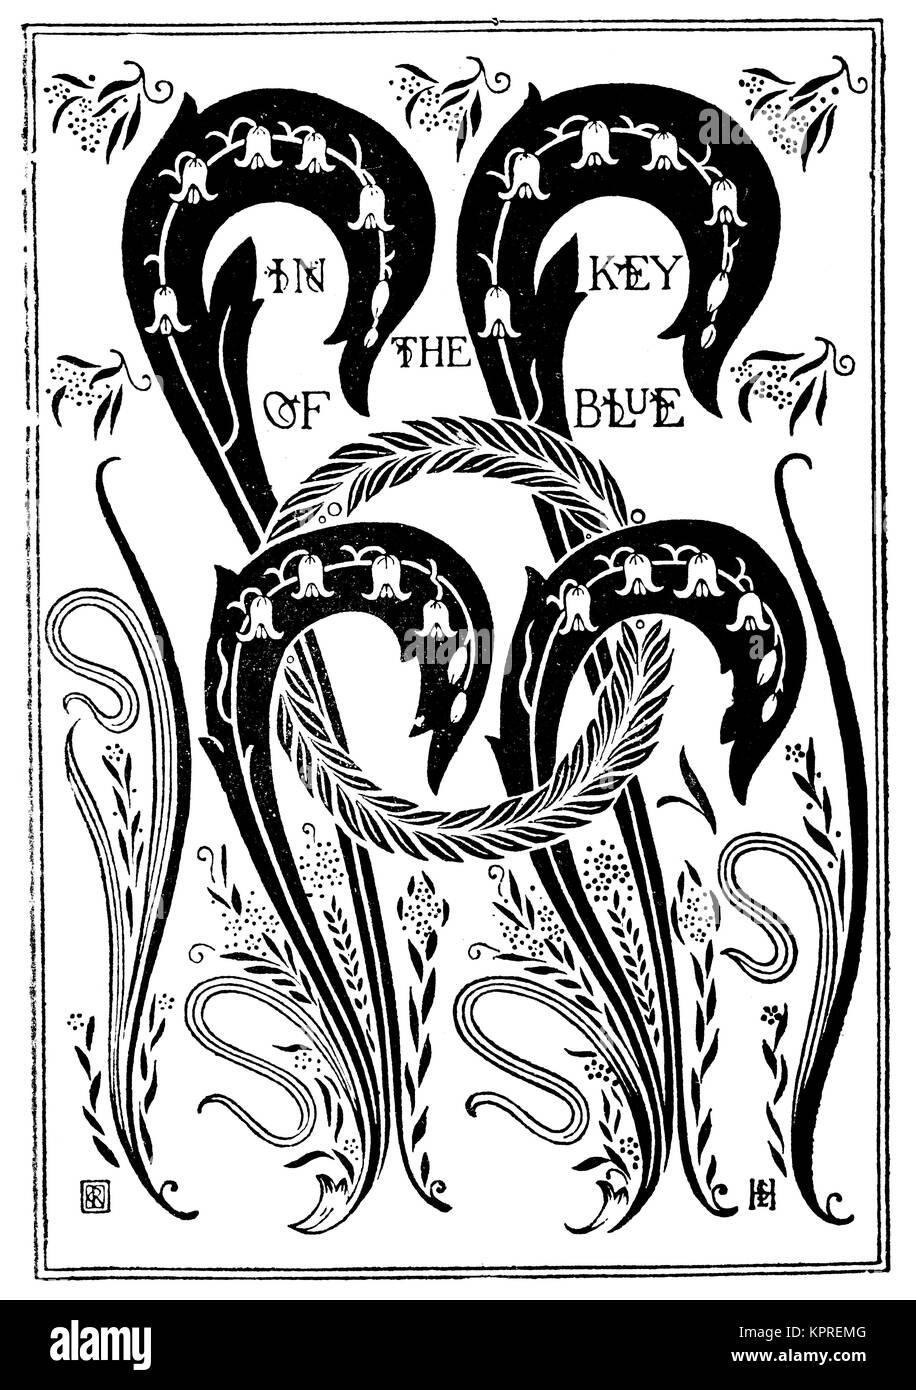 In the Key of Blue, 1894 book cover design by artist Charles Ricketts from Volume 4 of The Studio Magazine Stock Photo